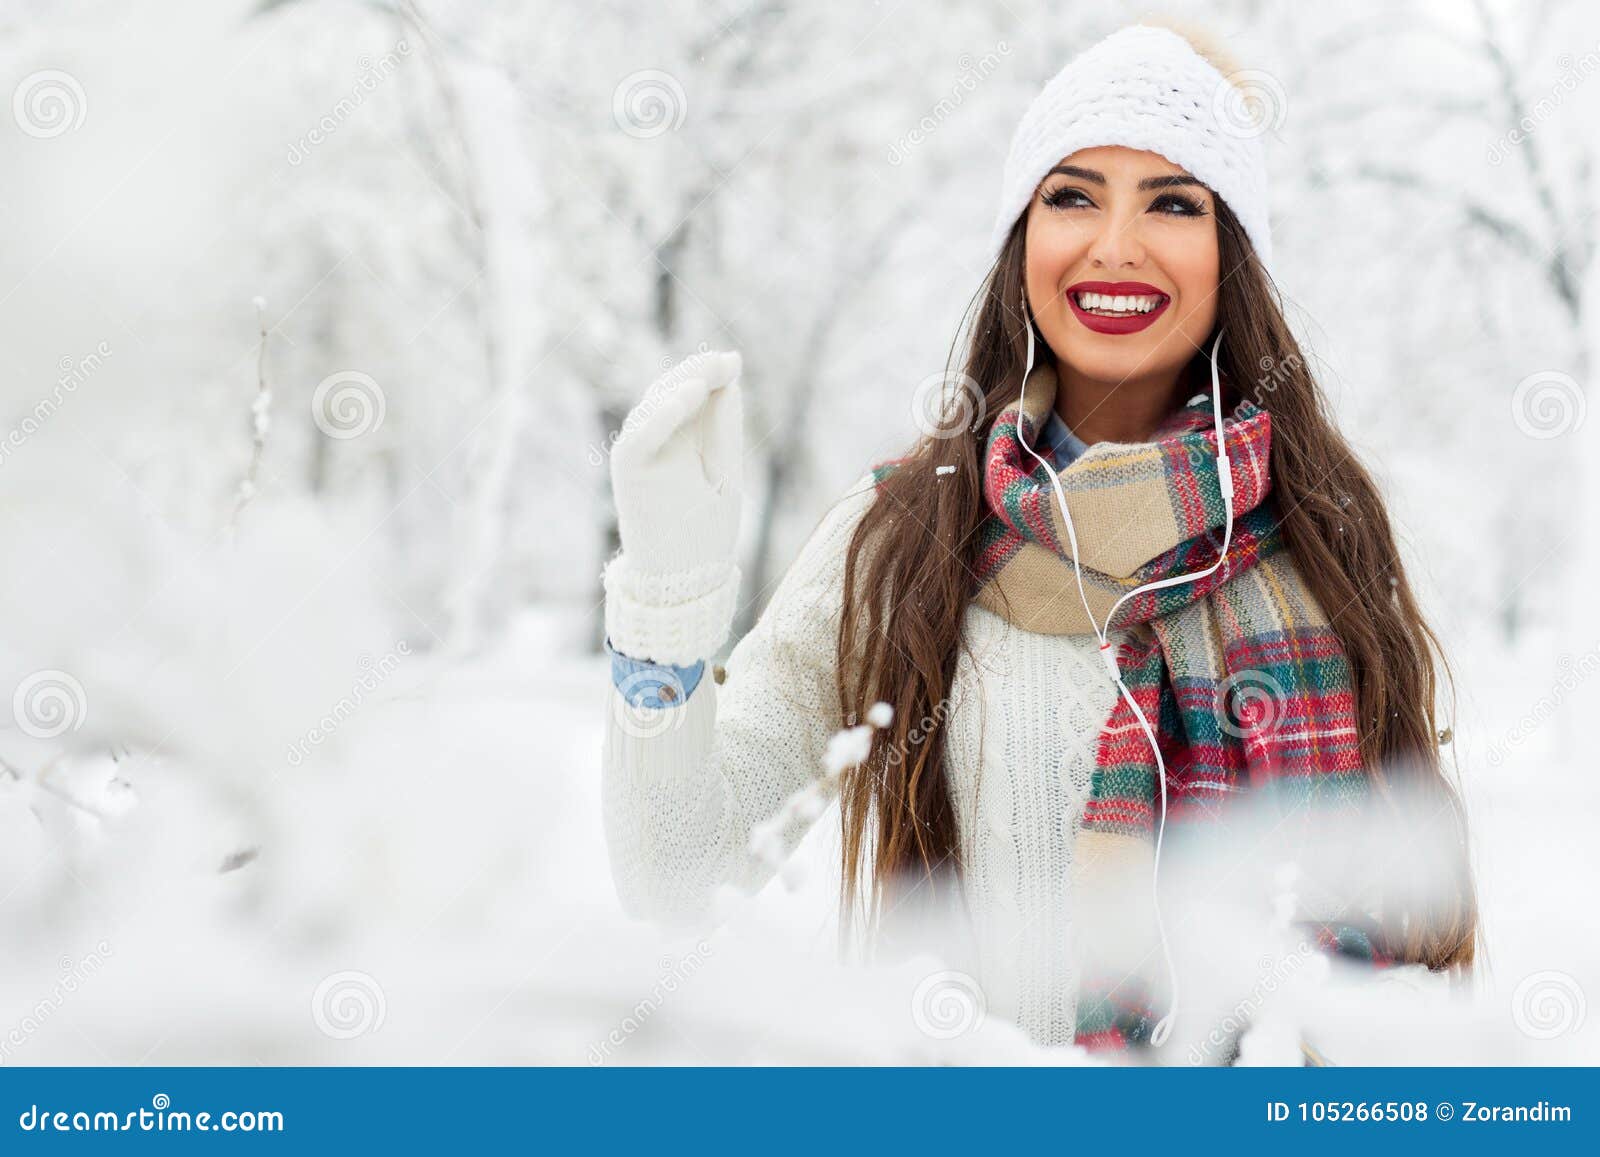 attractive young woman in wintertime outdoor